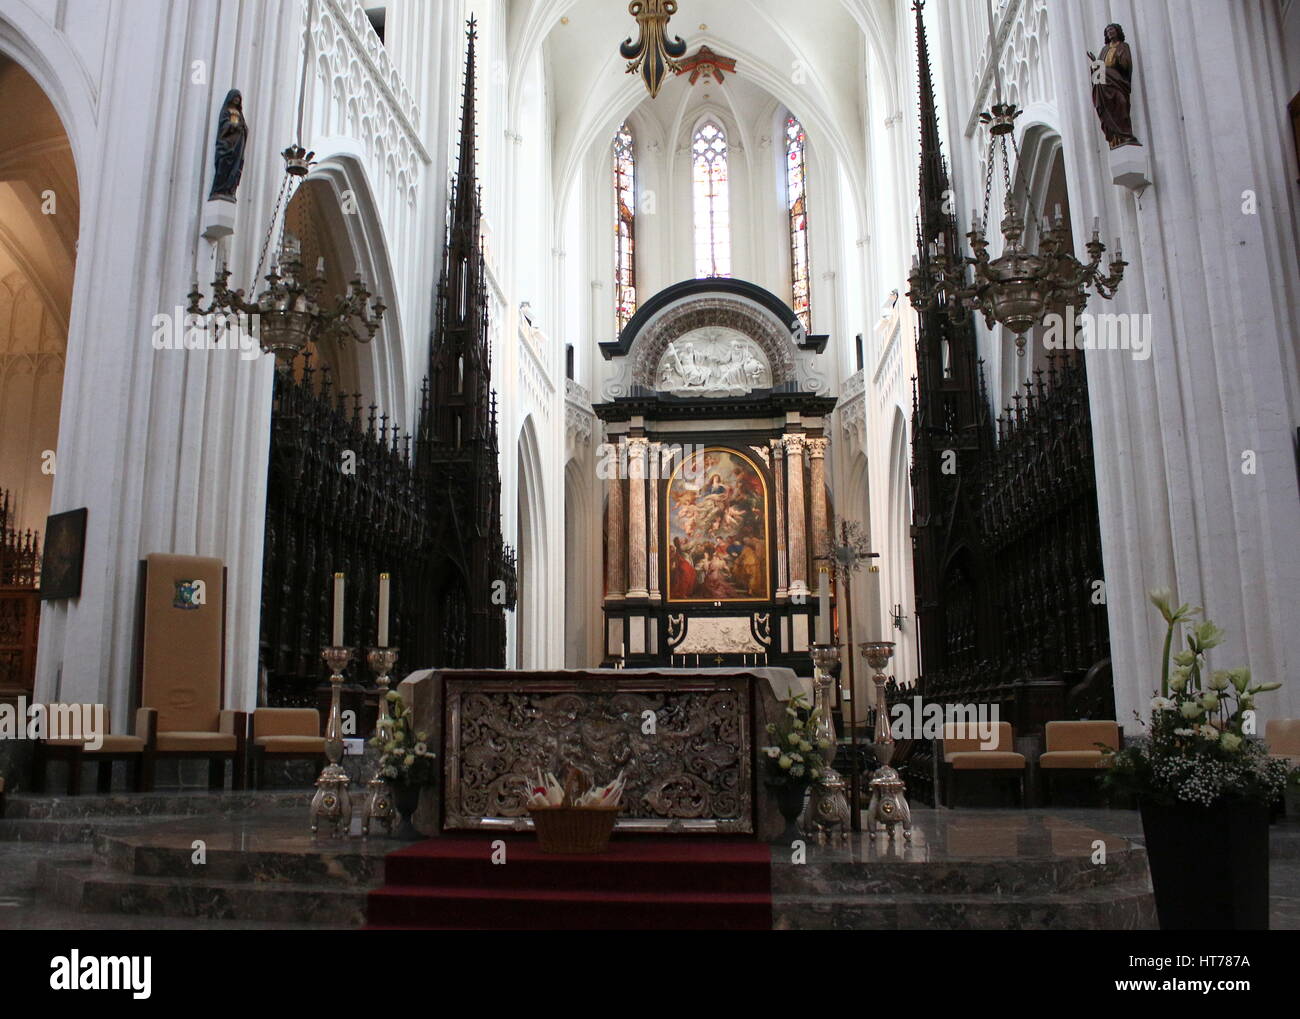 Interior of the Gothic Cathedral of our Lady (Onze-lieve-vrouwekathedraal), Antwerp, Belgium Stock Photo